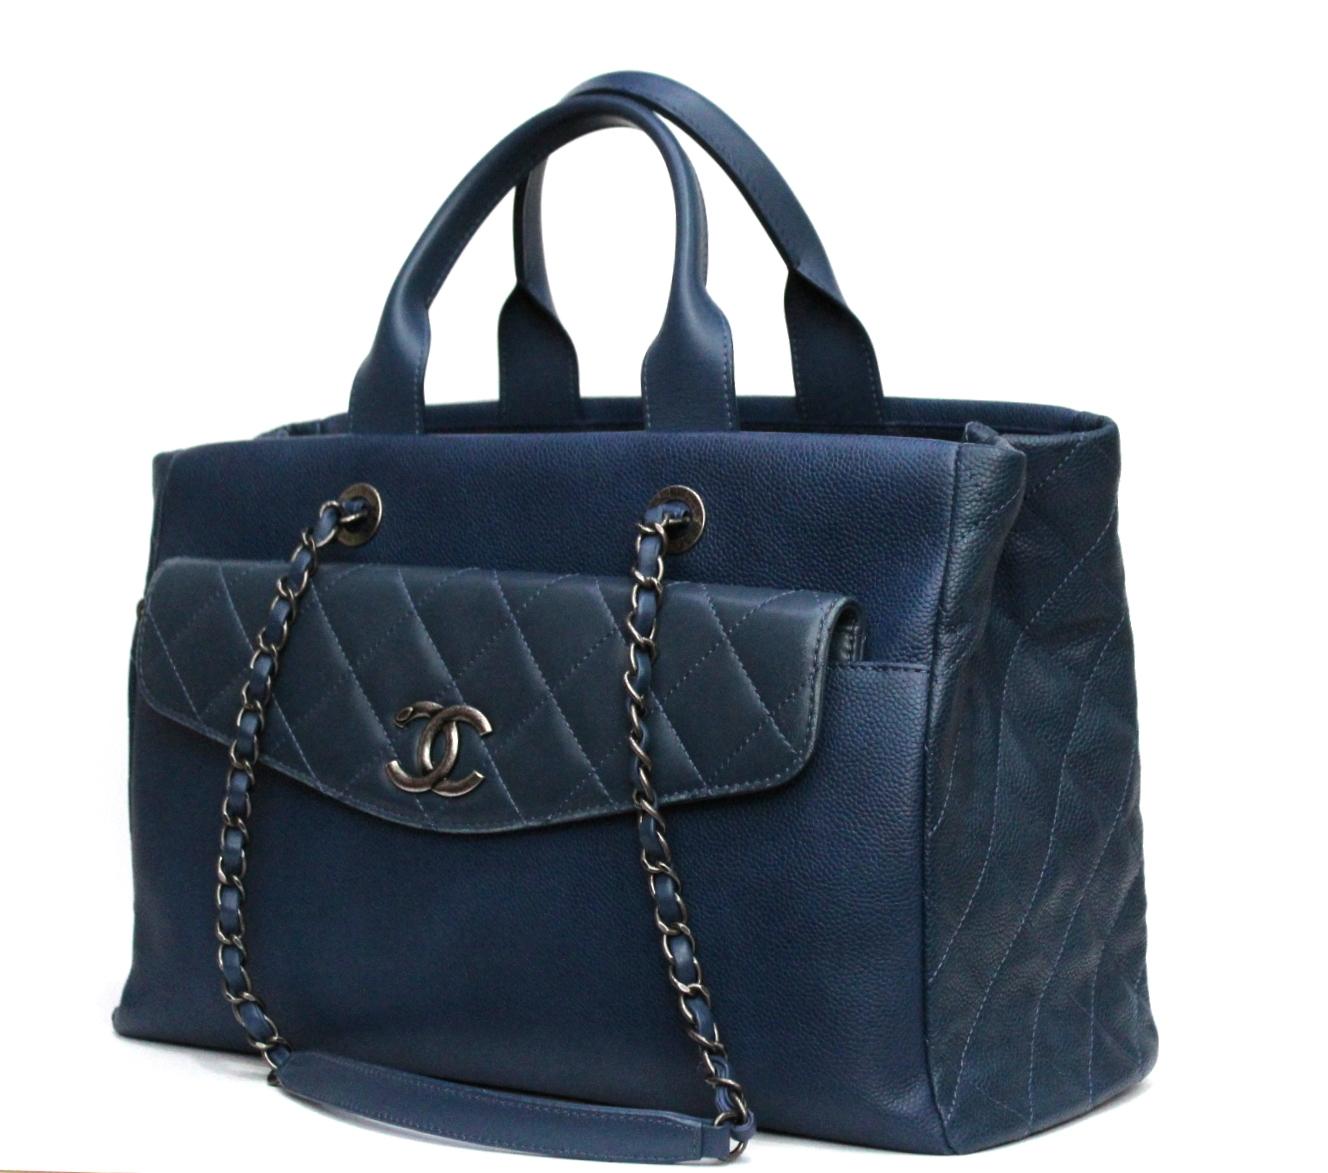 Chanel shopper bag made of navy blue hammered leather. The bag has a double handle but also a double chain to ensure it is worn on the shoulder or carried by hand. Internally it is divided into two compartments plus a central zip pocket. On the